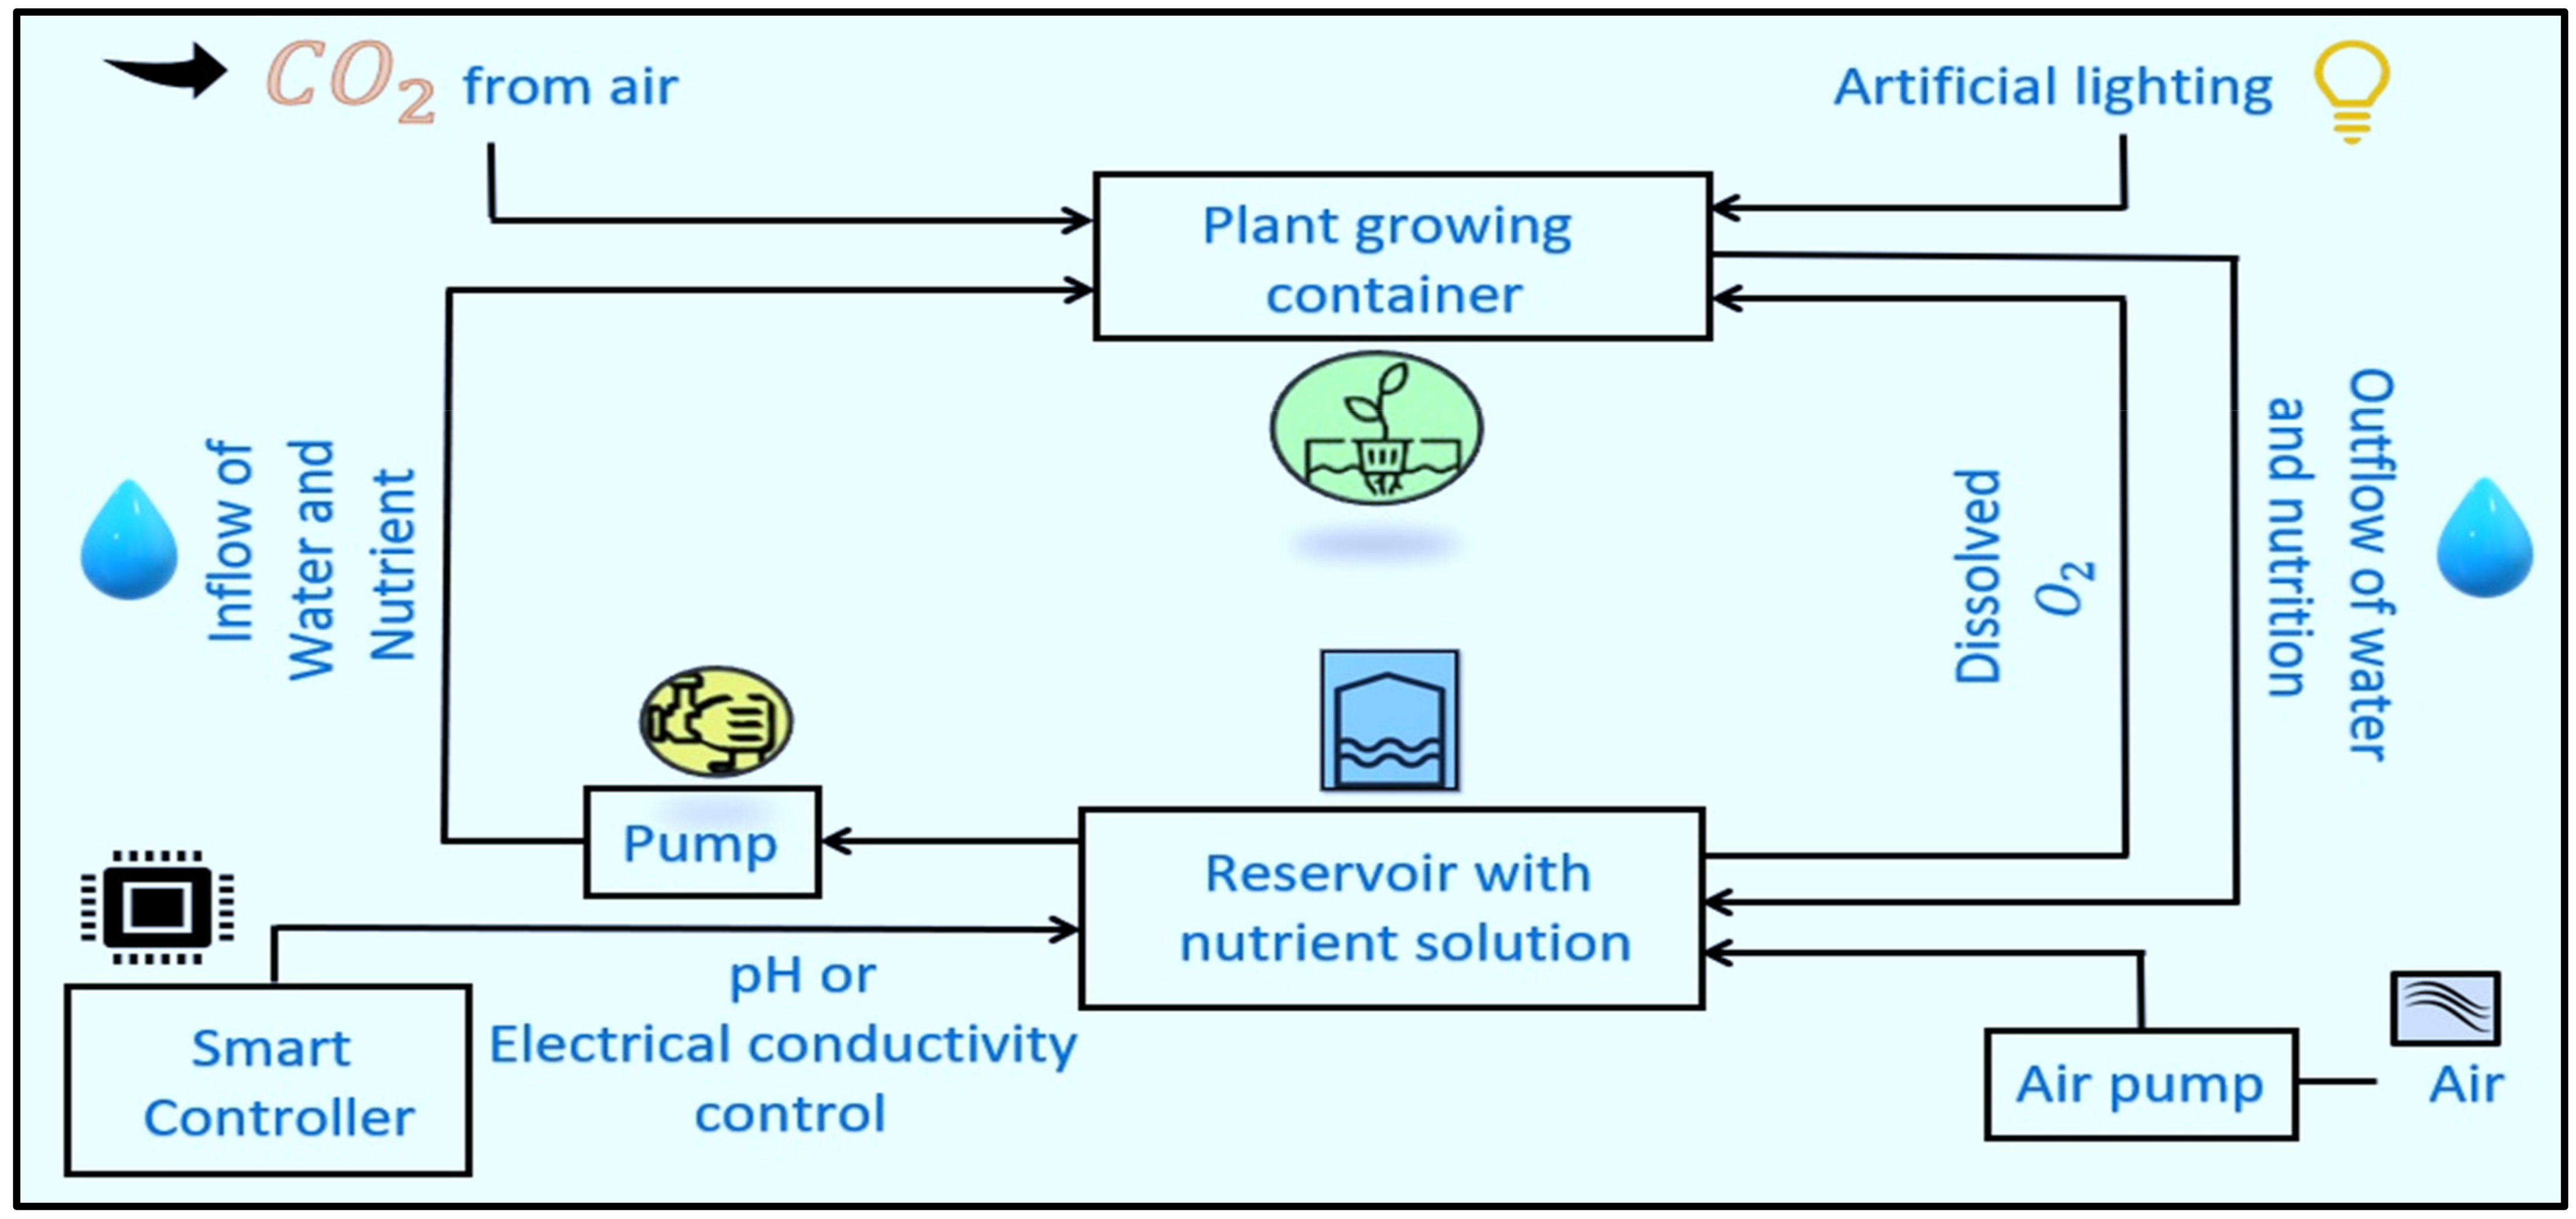 https://pub.mdpi-res.com/agriengineering/agriengineering-03-00047/article_deploy/html/images/agriengineering-03-00047-g003.png?1634037913